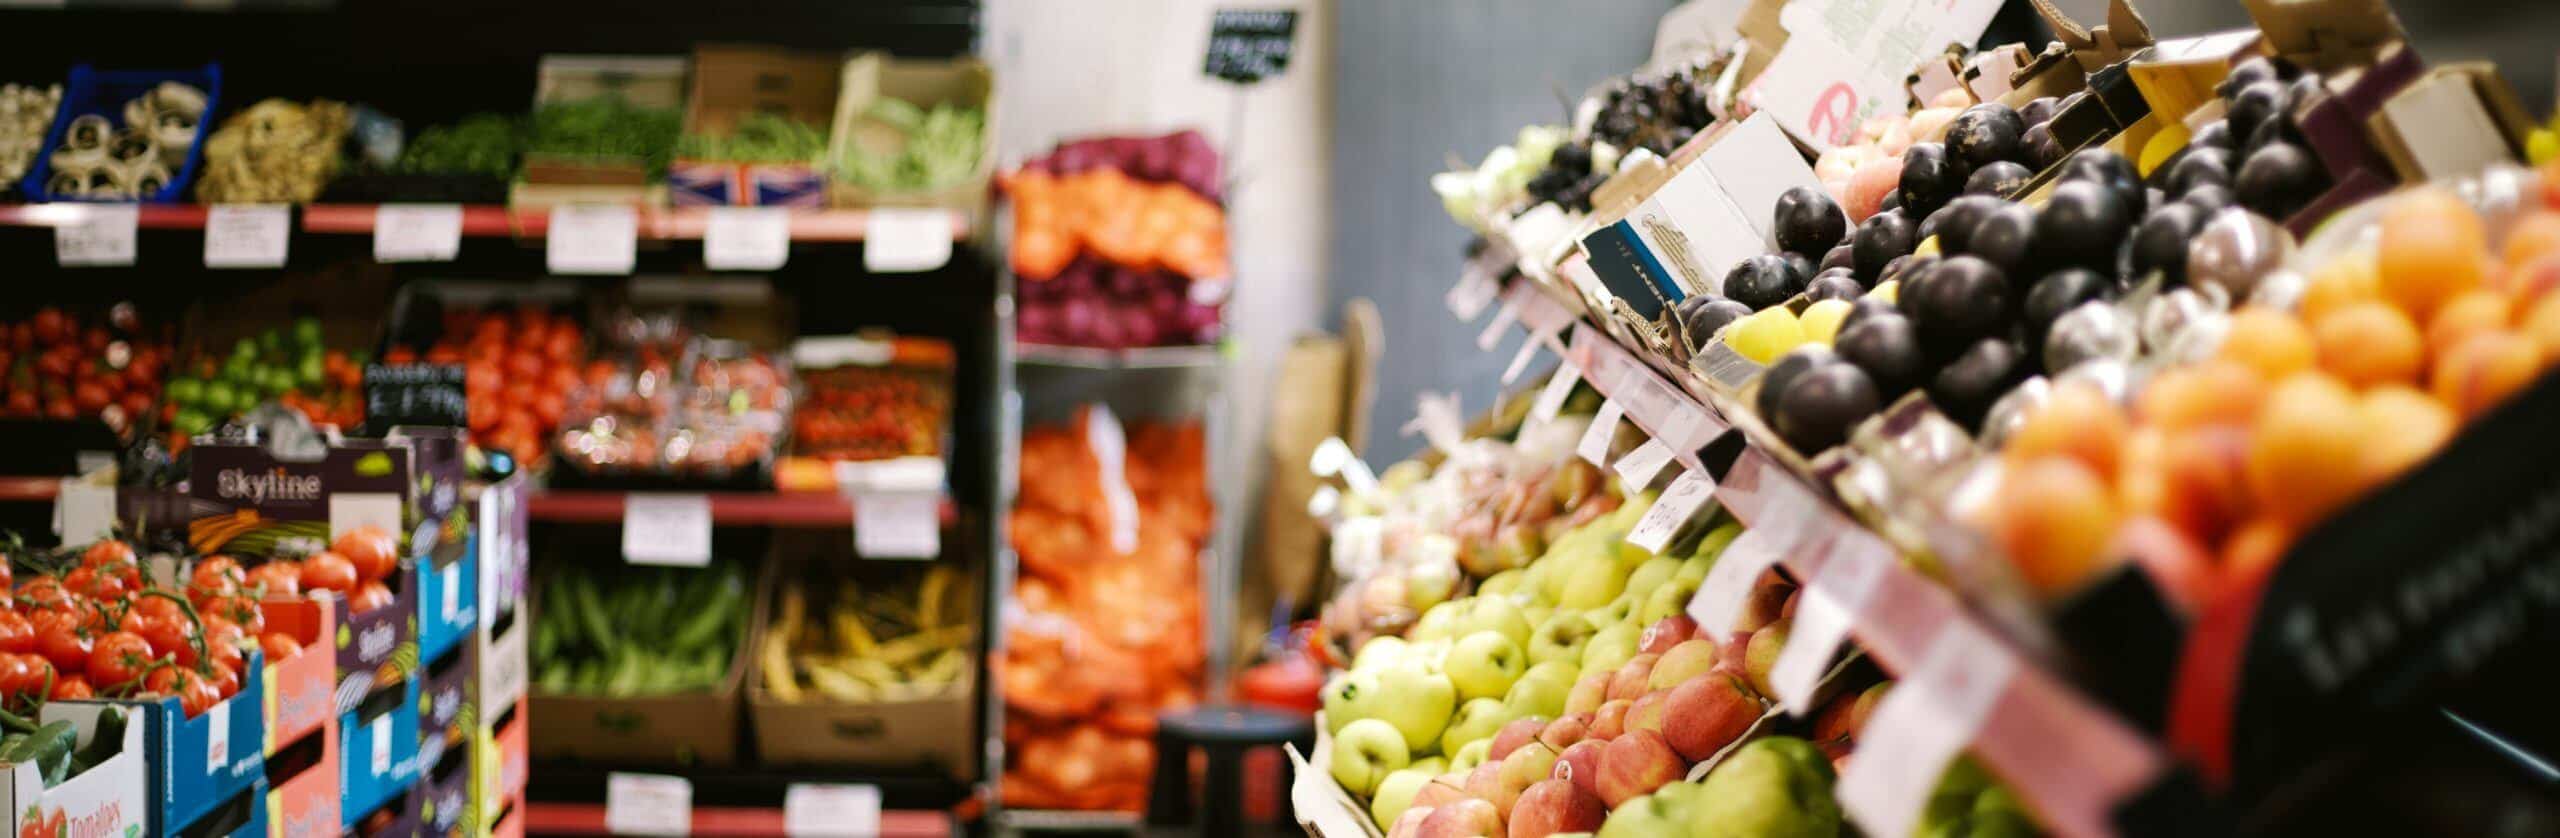 A row of fruits and vegetables in a grocery store.